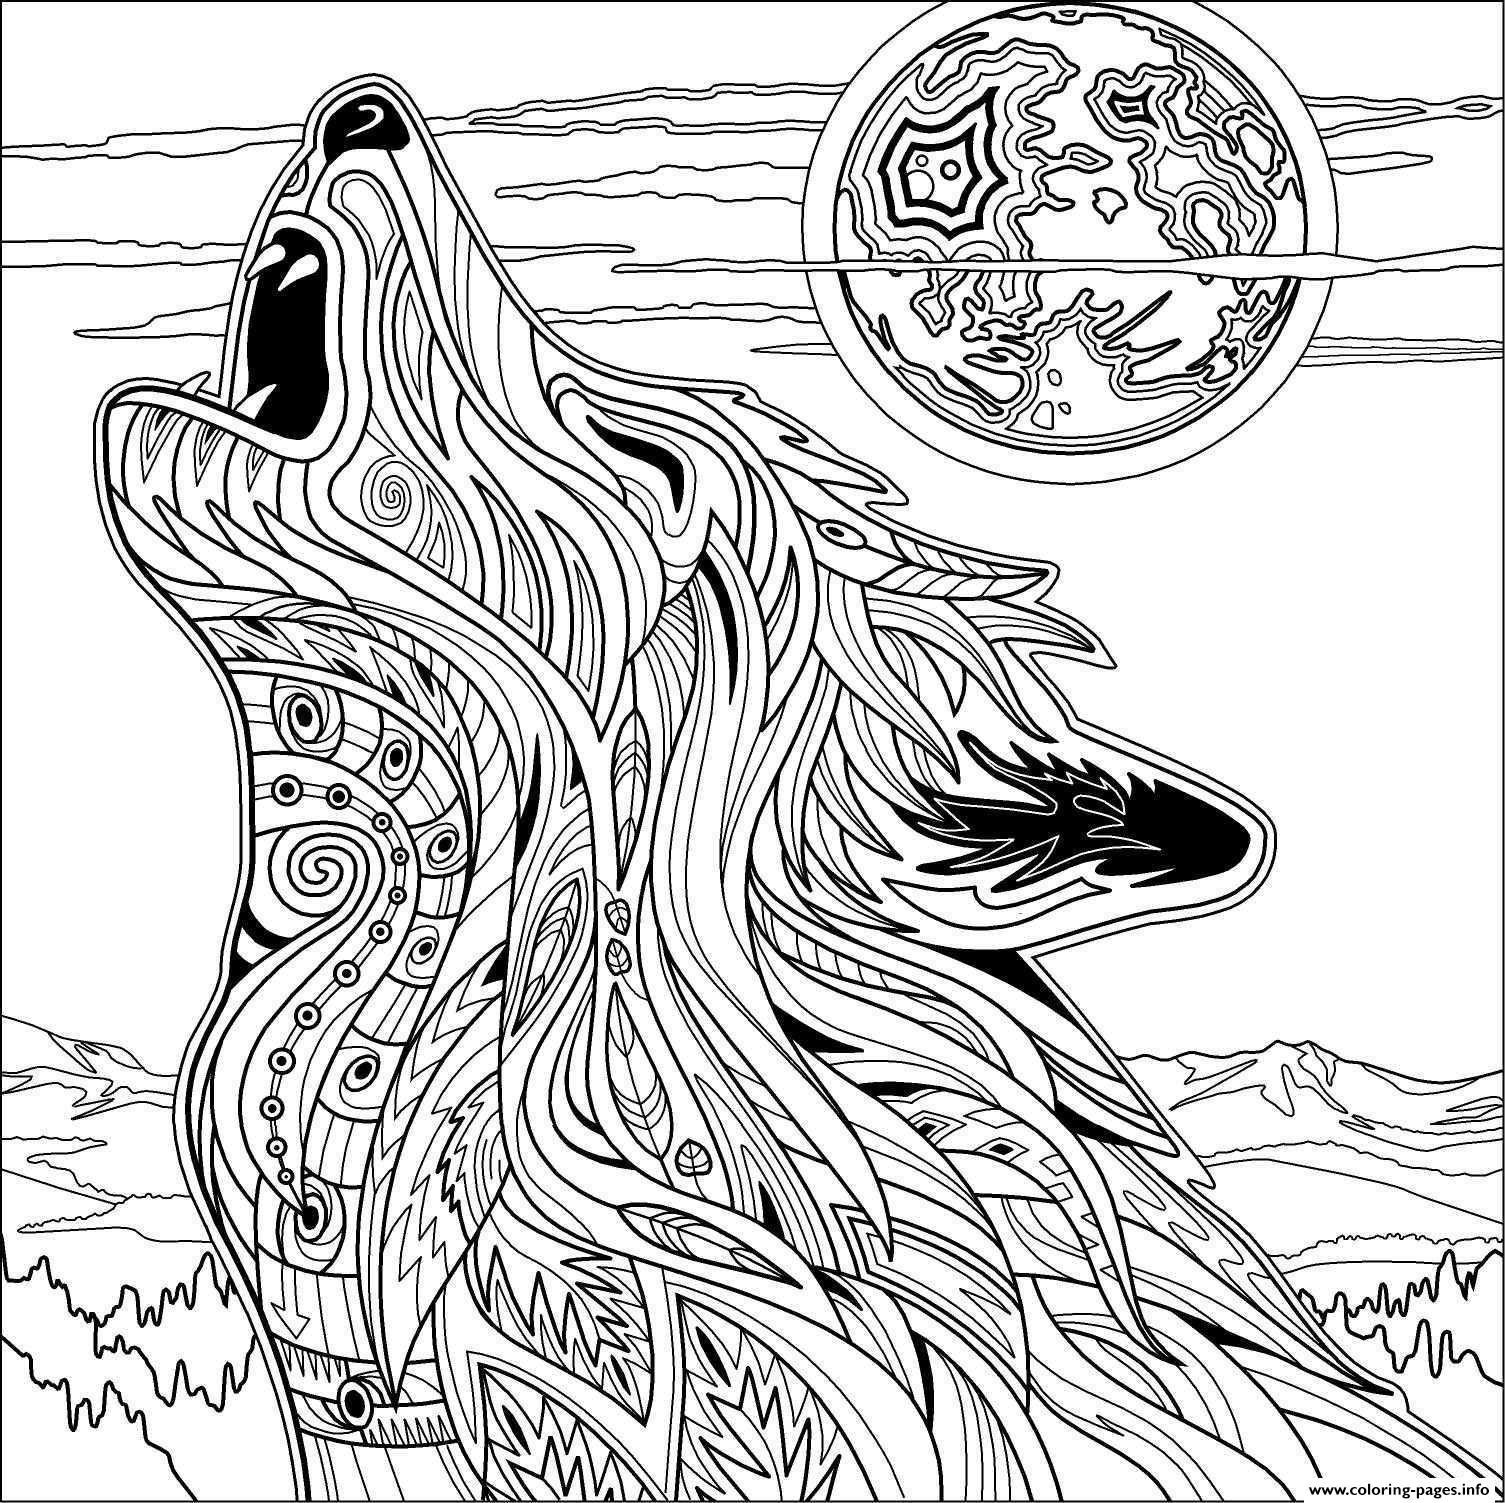 Coloring Pages For Adults Wolf
 Werewolf Coloring Pages For Adults Part 5